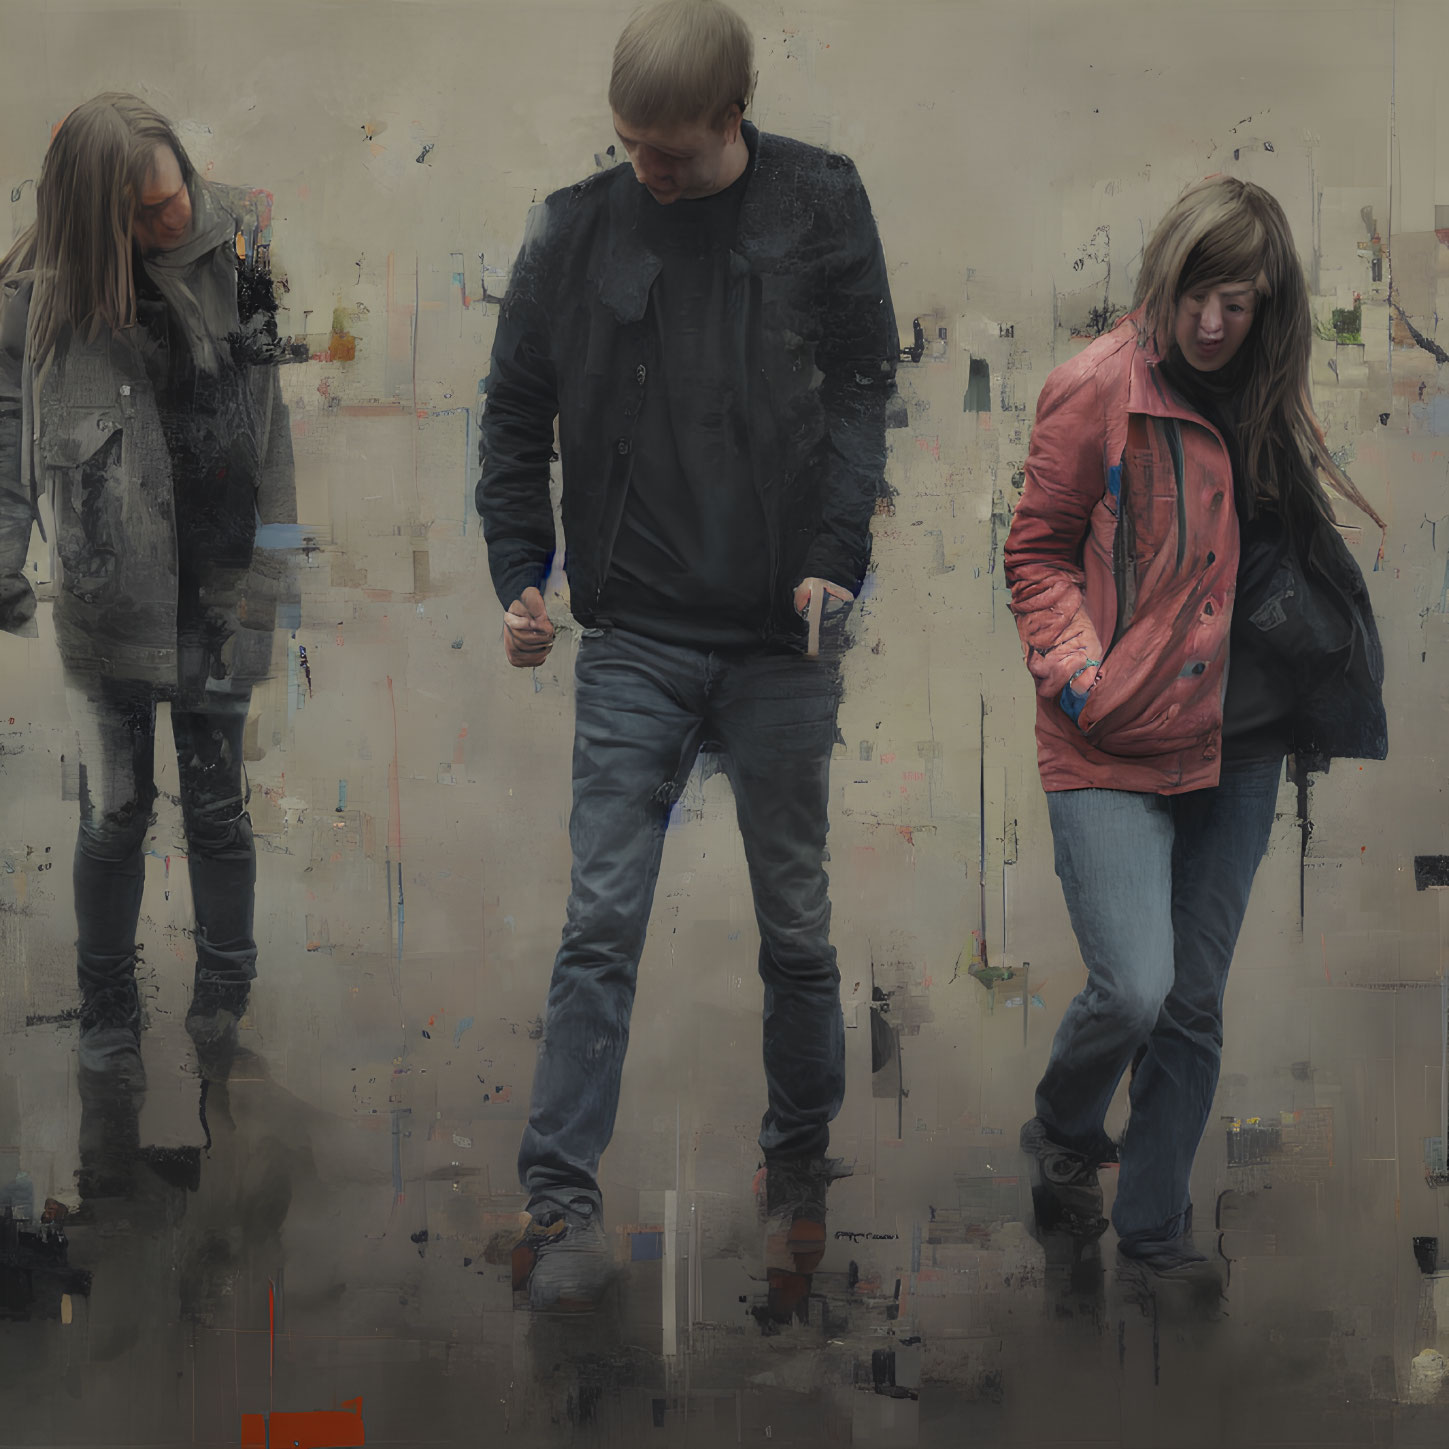 Three people walking reflected on wet, paint-speckled surface